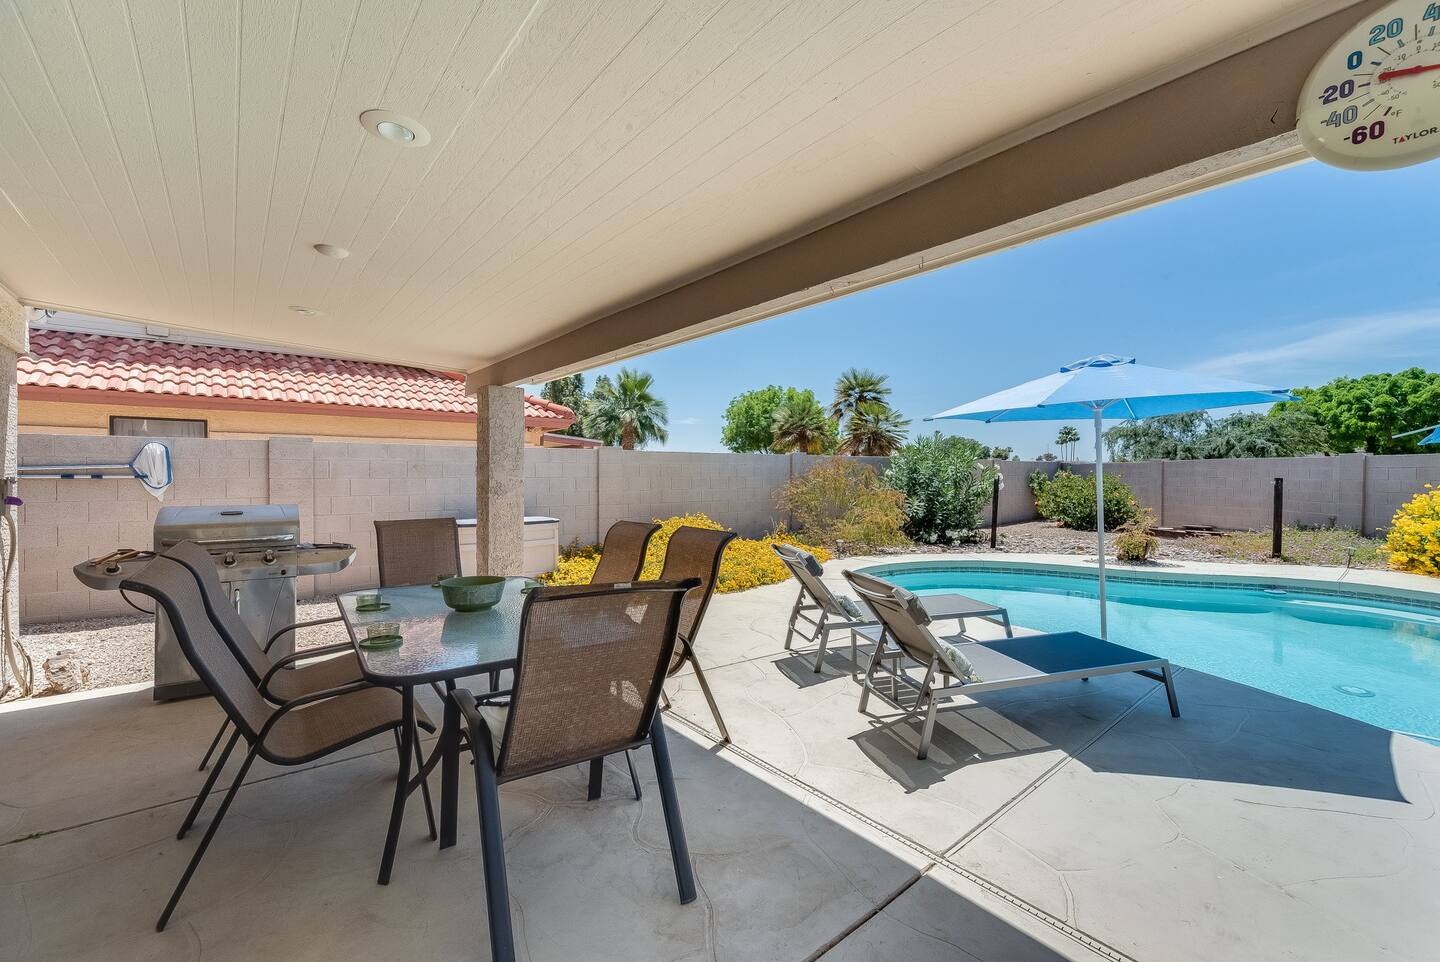 Glendale Vacation Rentals, Cahill Casa - Private covered patio with outdoor furniture